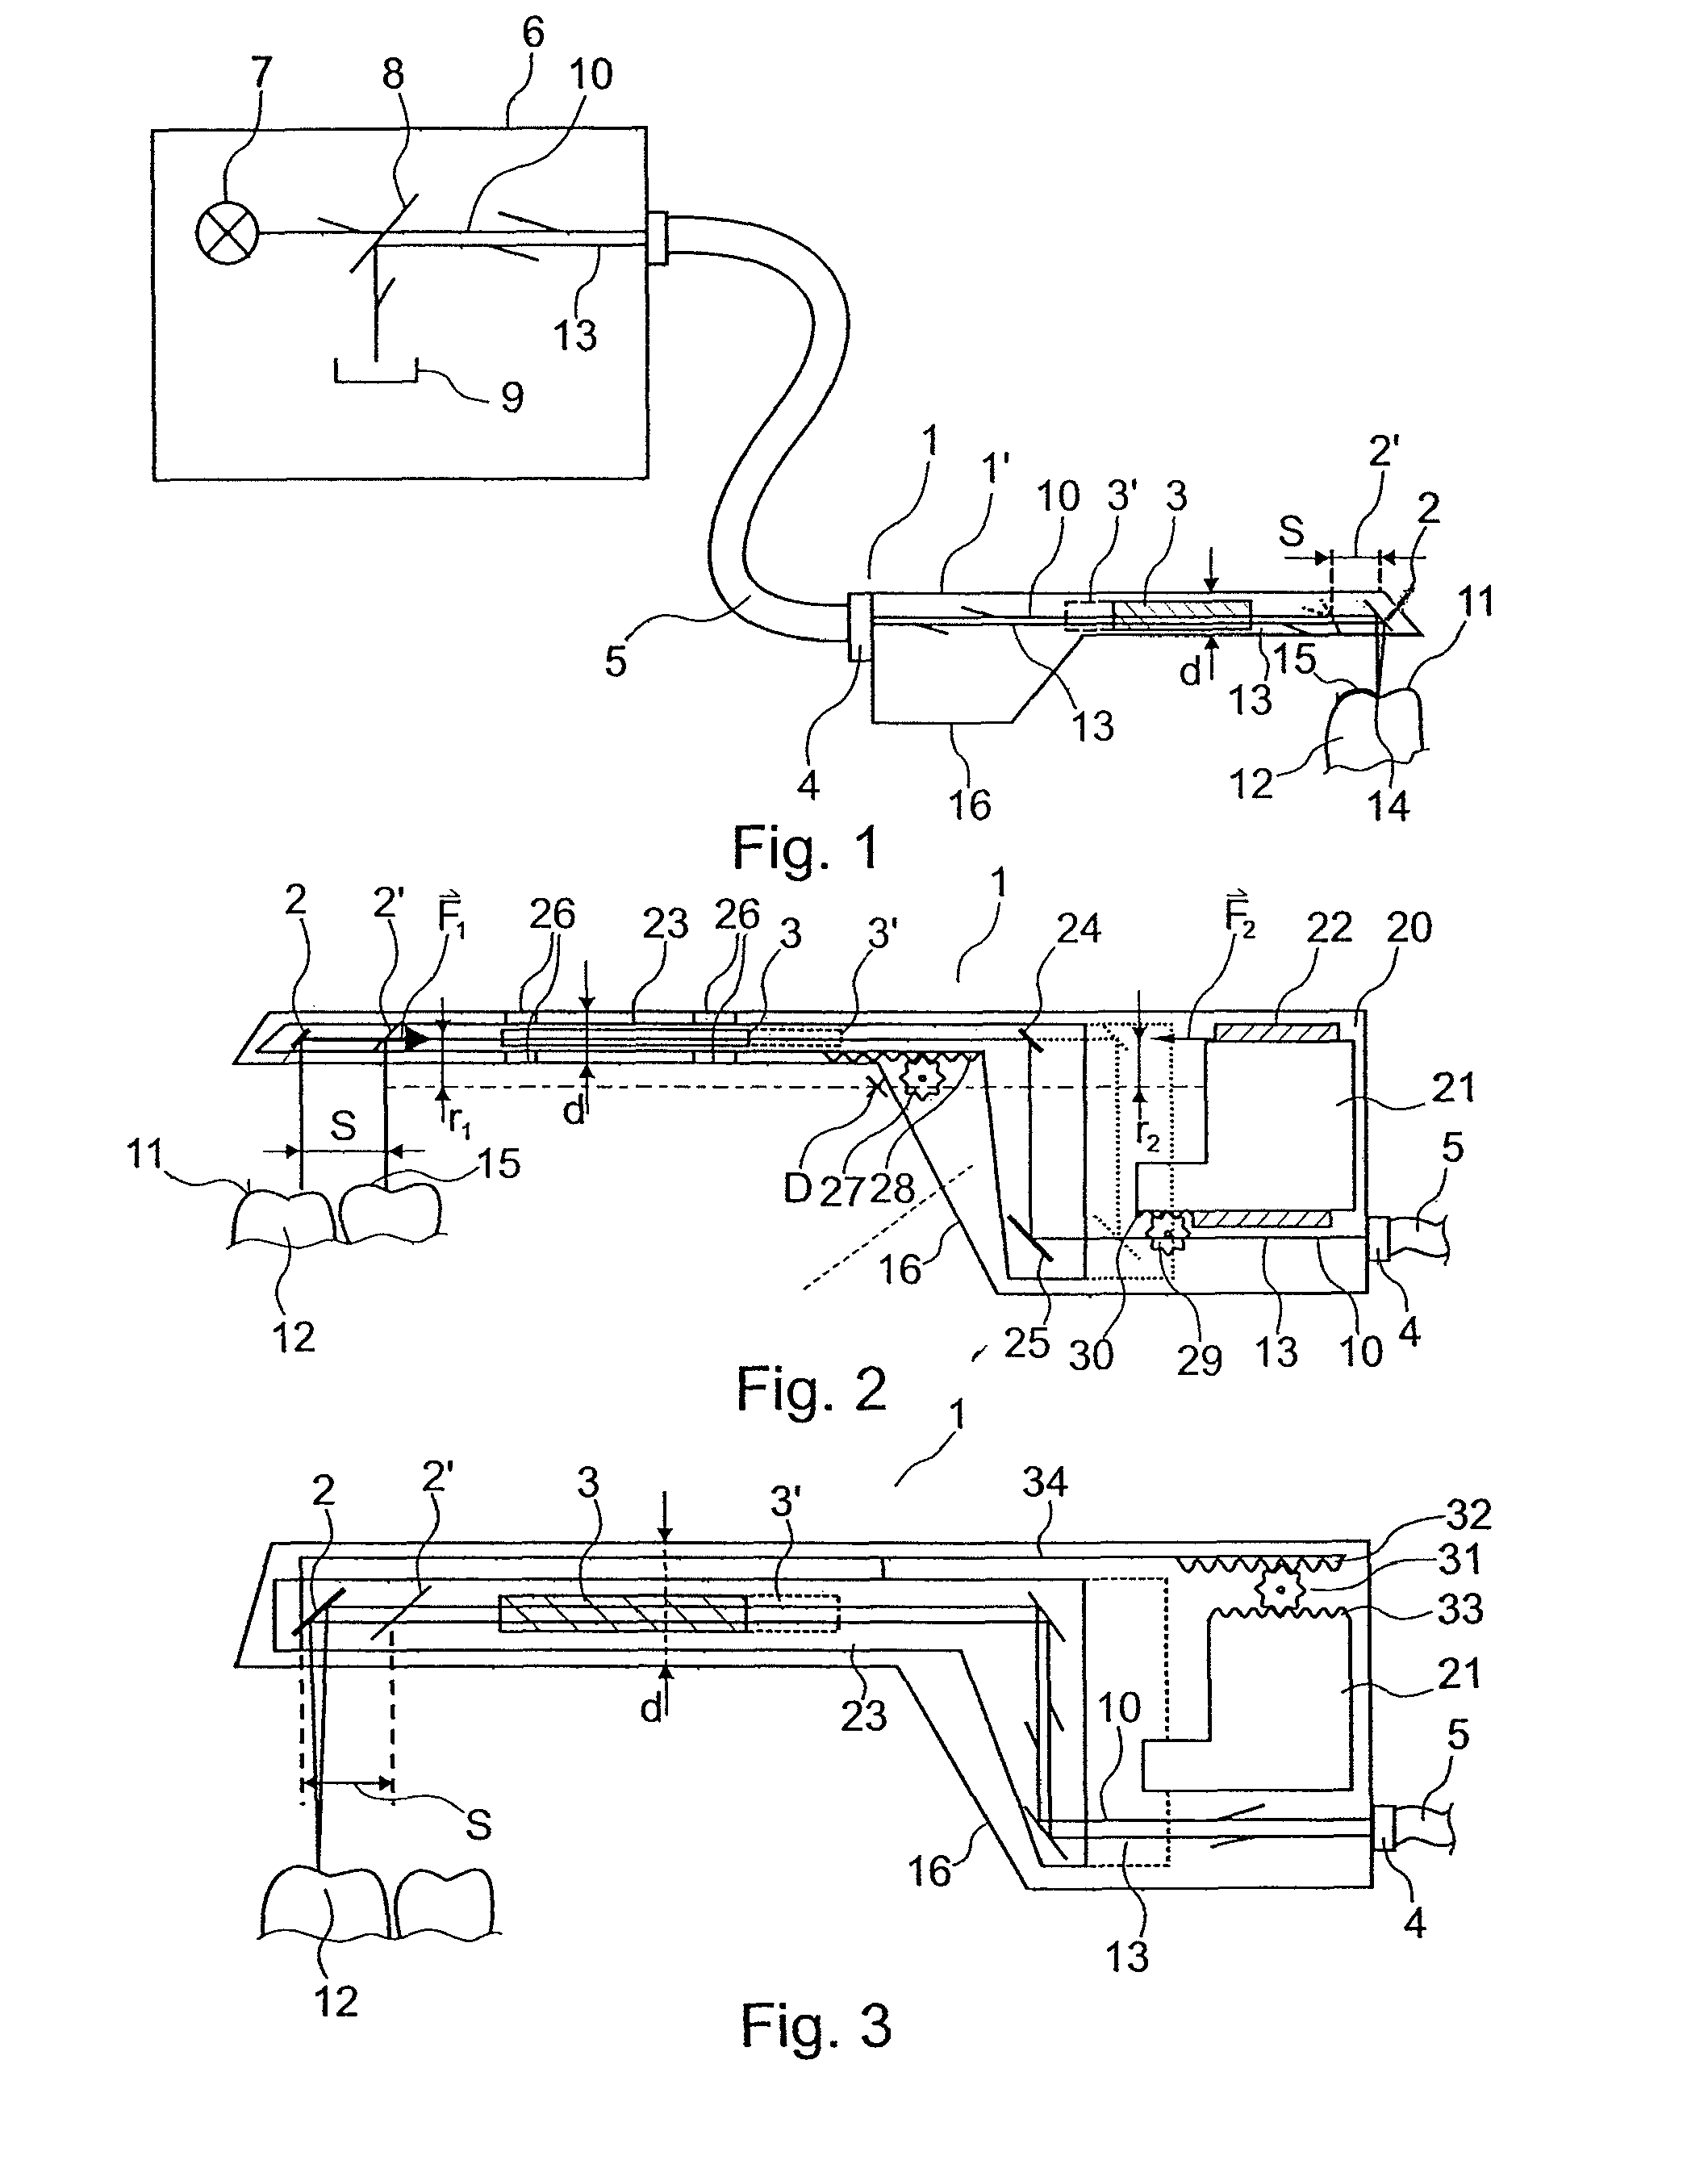 Apparatus and method for optical 3D measurement